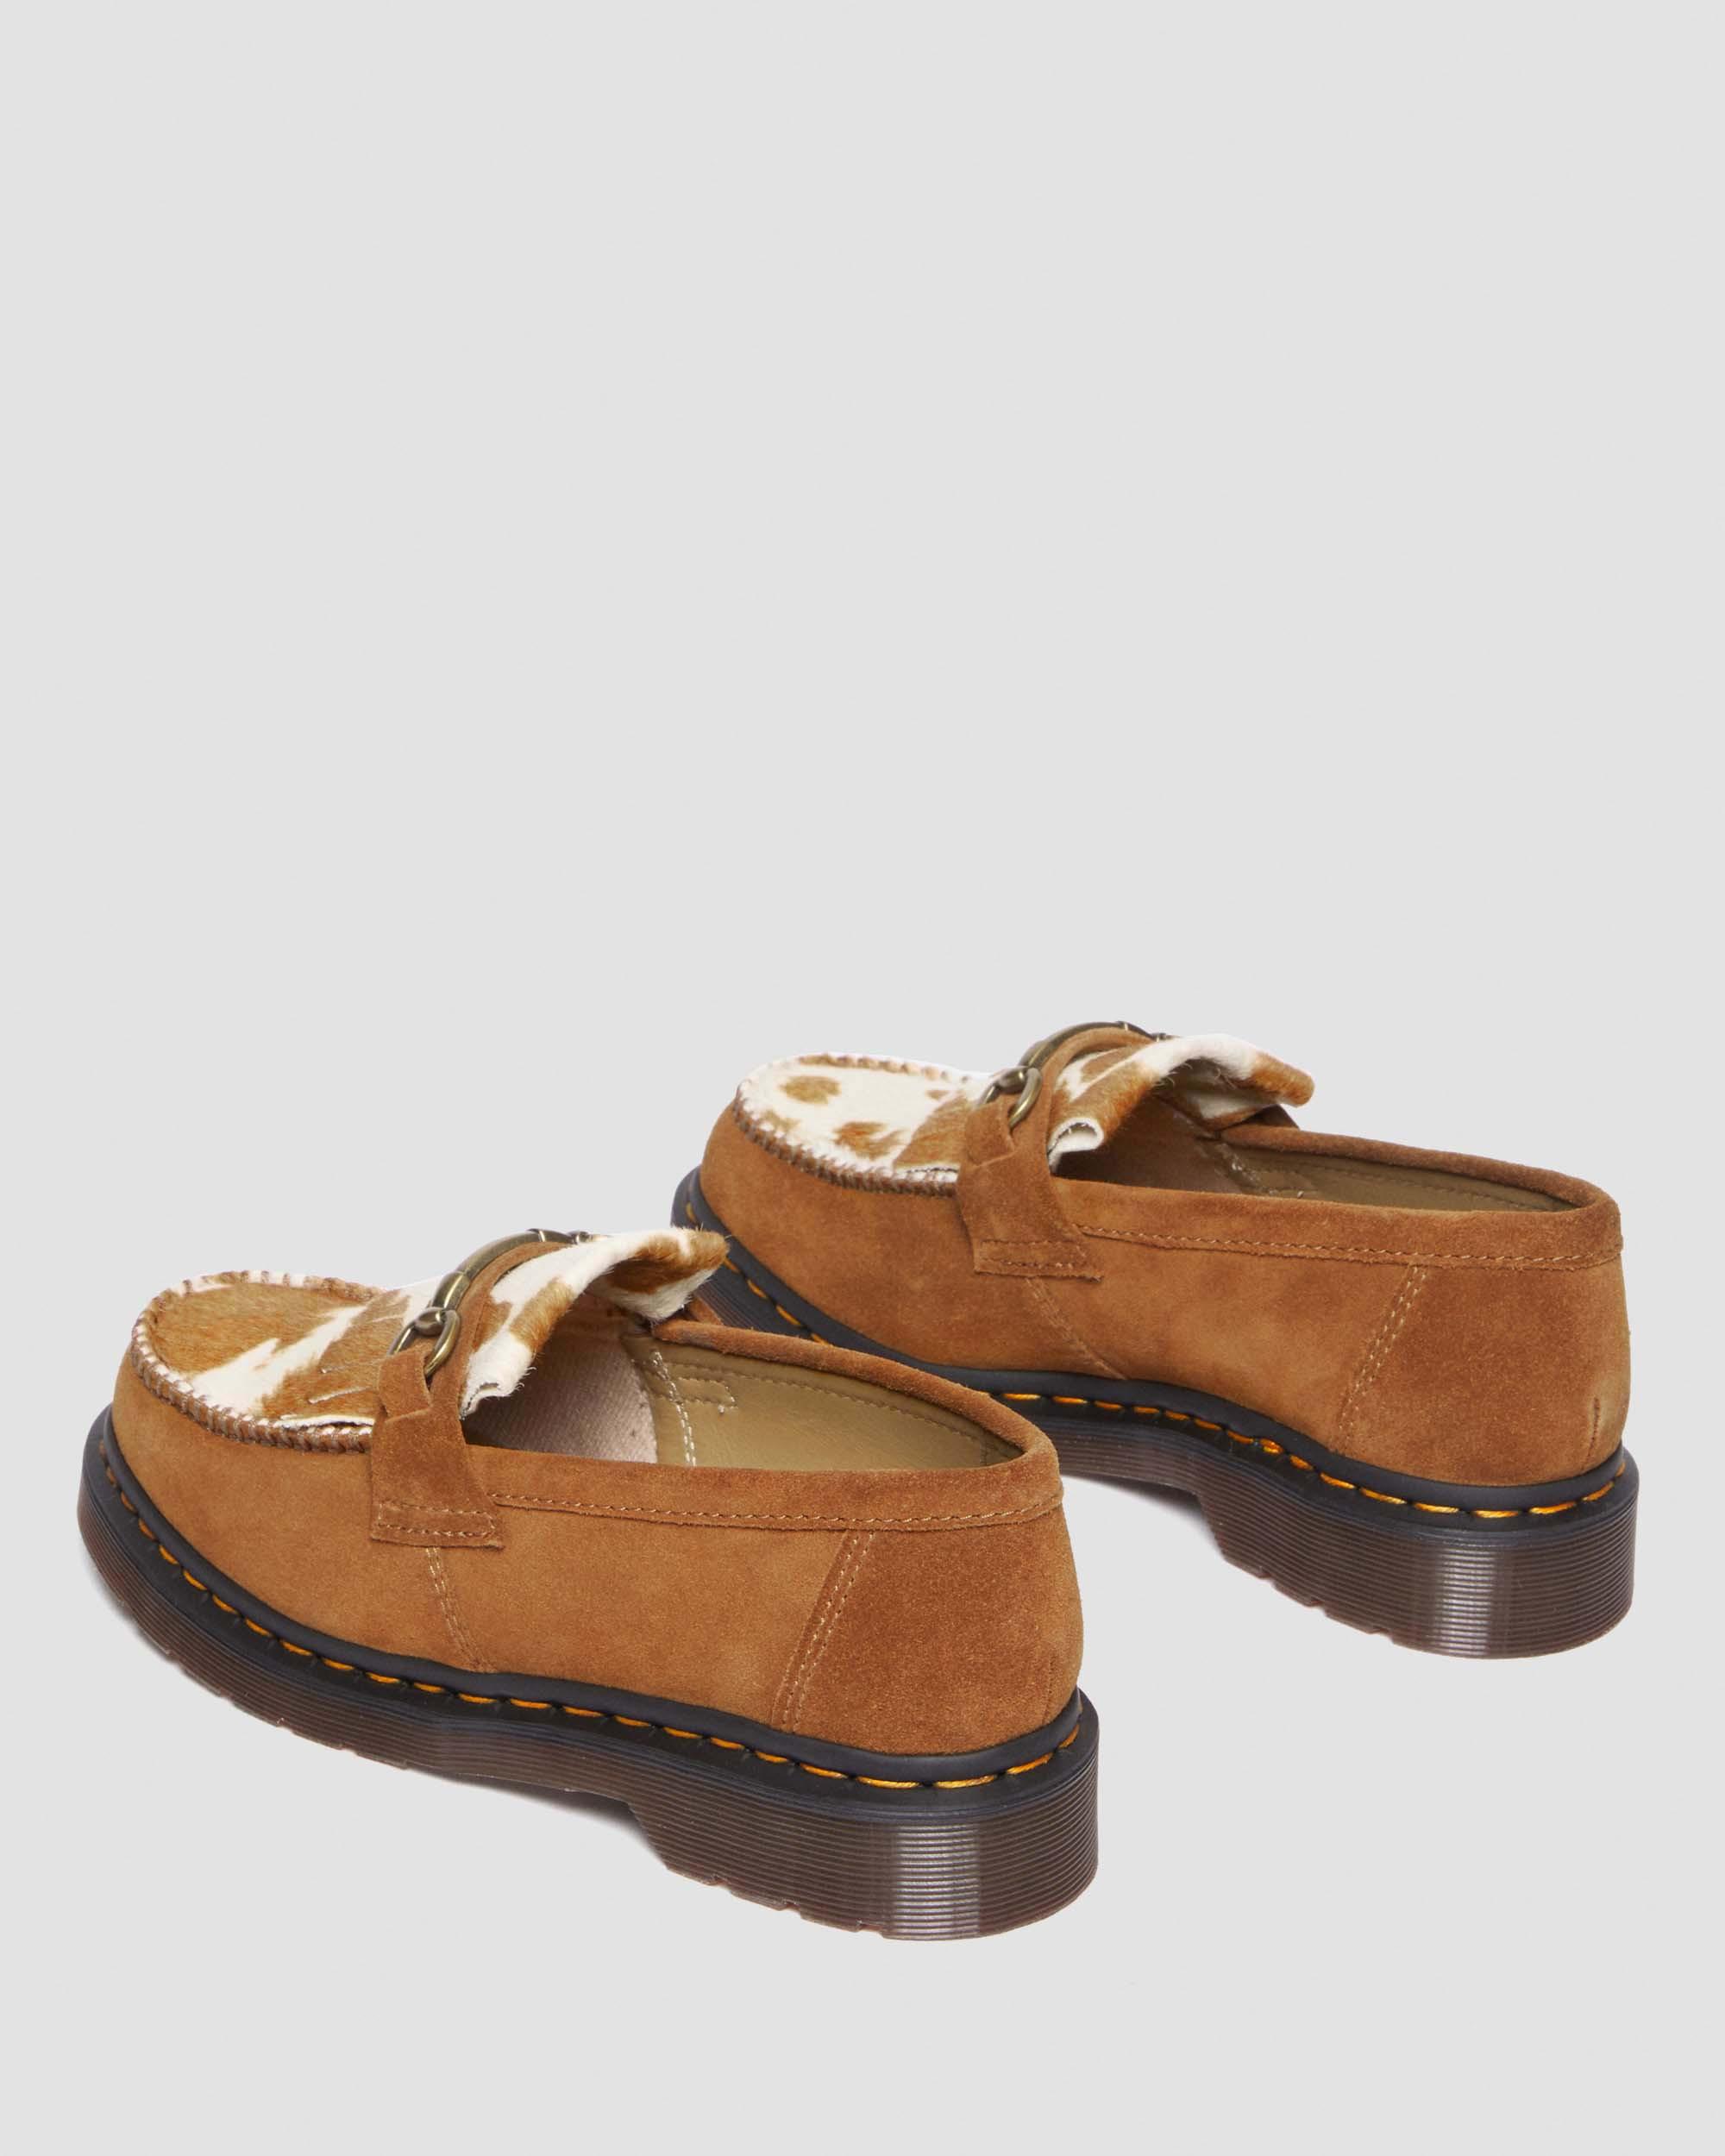 Adrian Snaffle Hair-On Cow Print Suede Loafers in PECAN BROWN+JERSEY COW PRINT